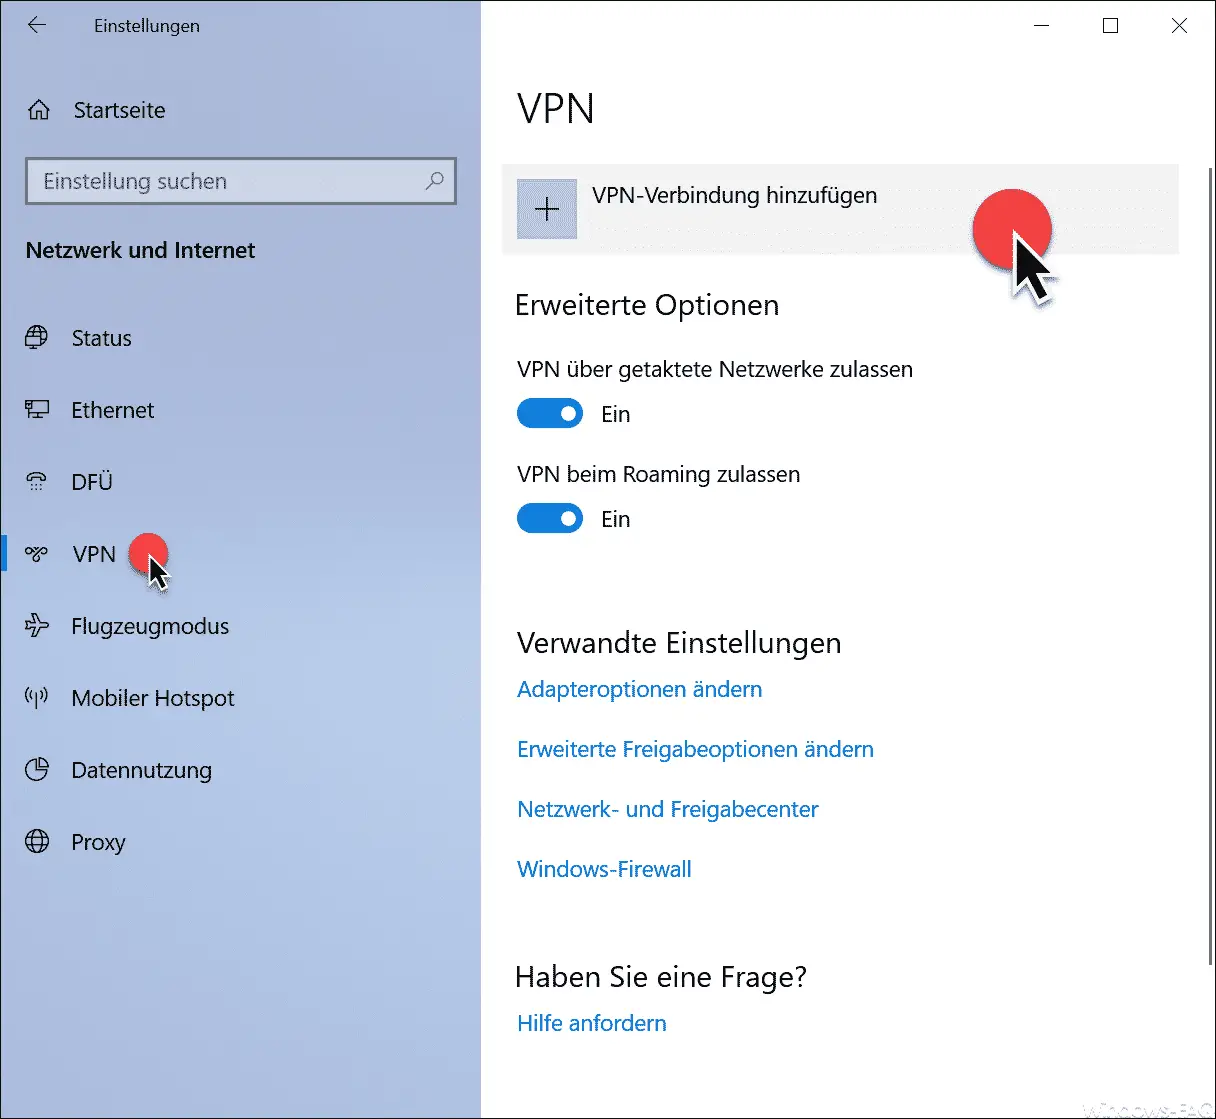 Add VPN connection